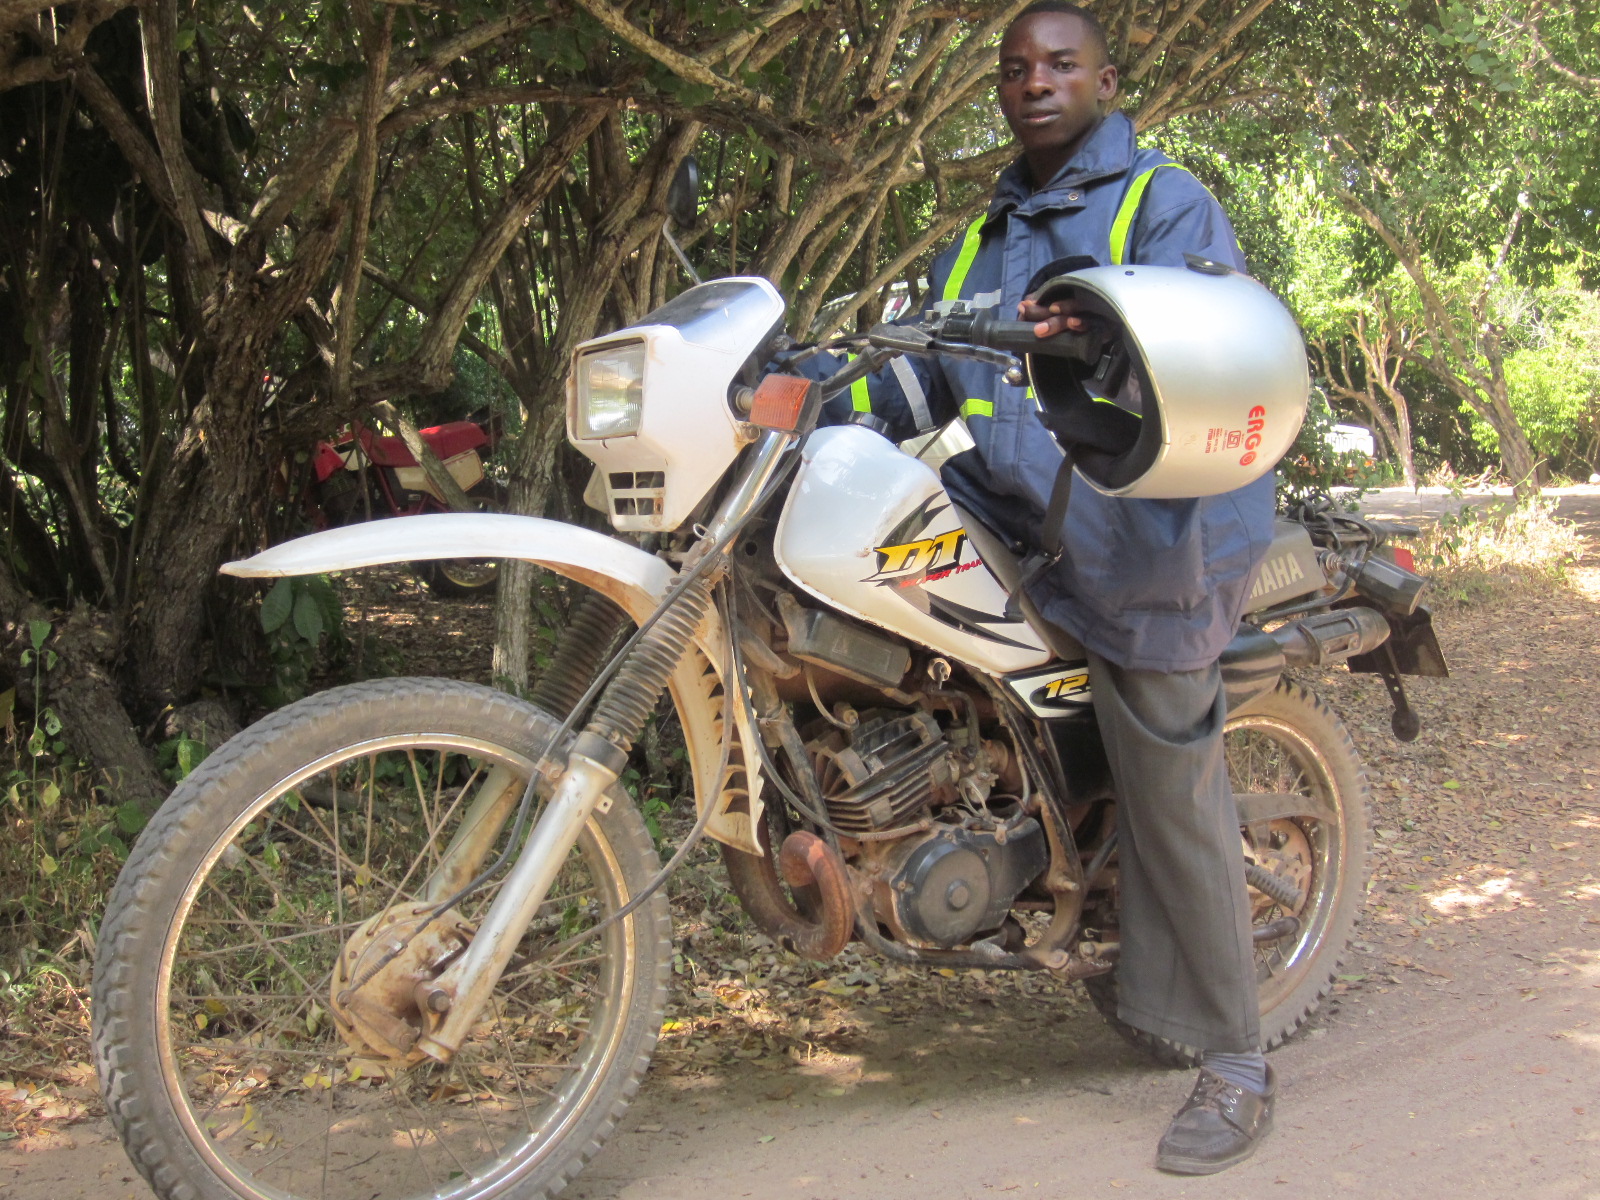 Bimbo, a member of A Rocha's ASSETS team, on his motorcycle dispatching the bursary cheques to the ASSETS students